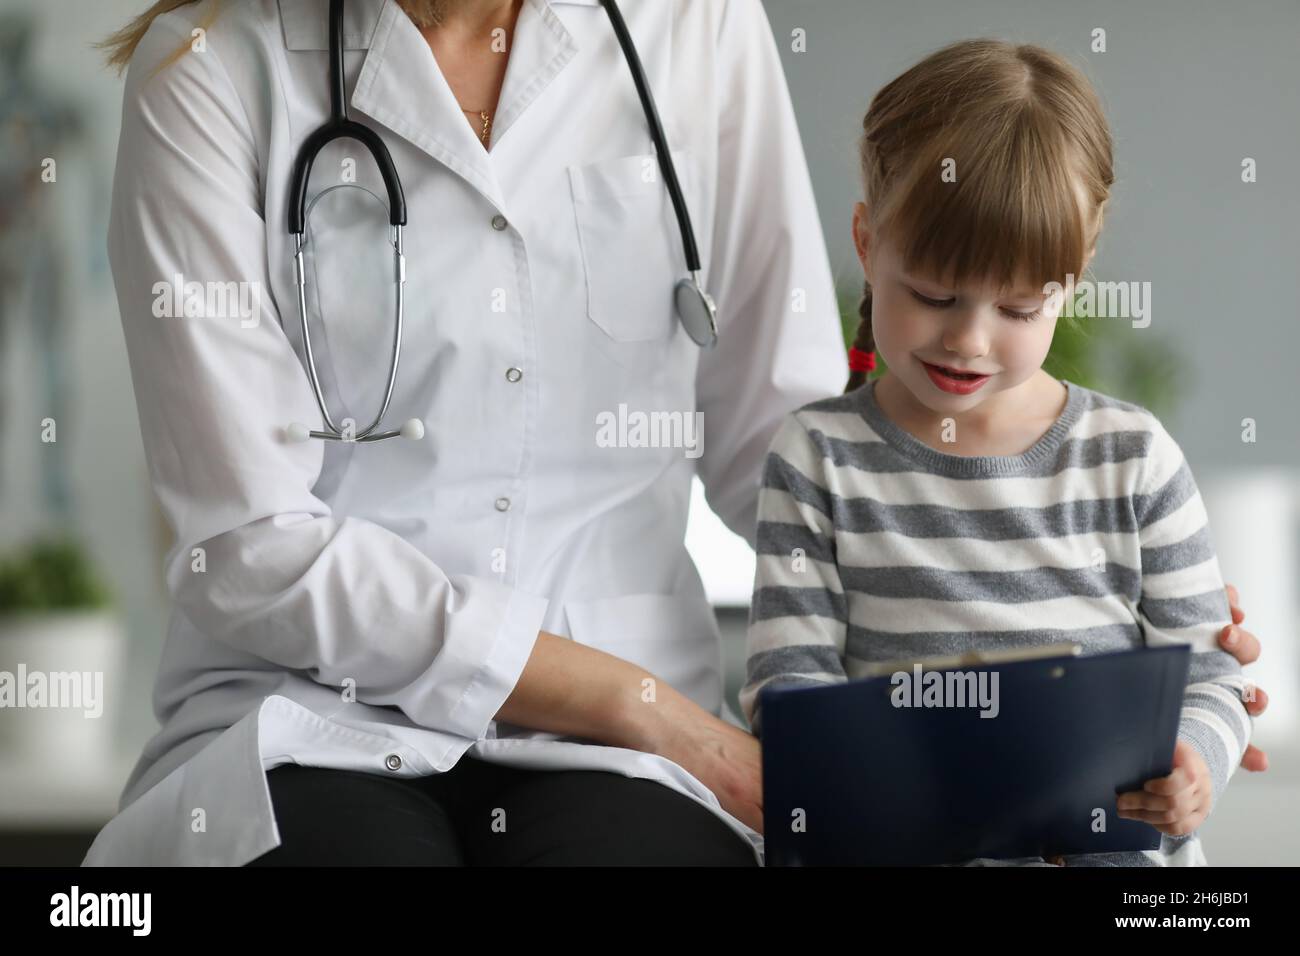 Doctor sits next to little girl holding clipboard Stock Photo